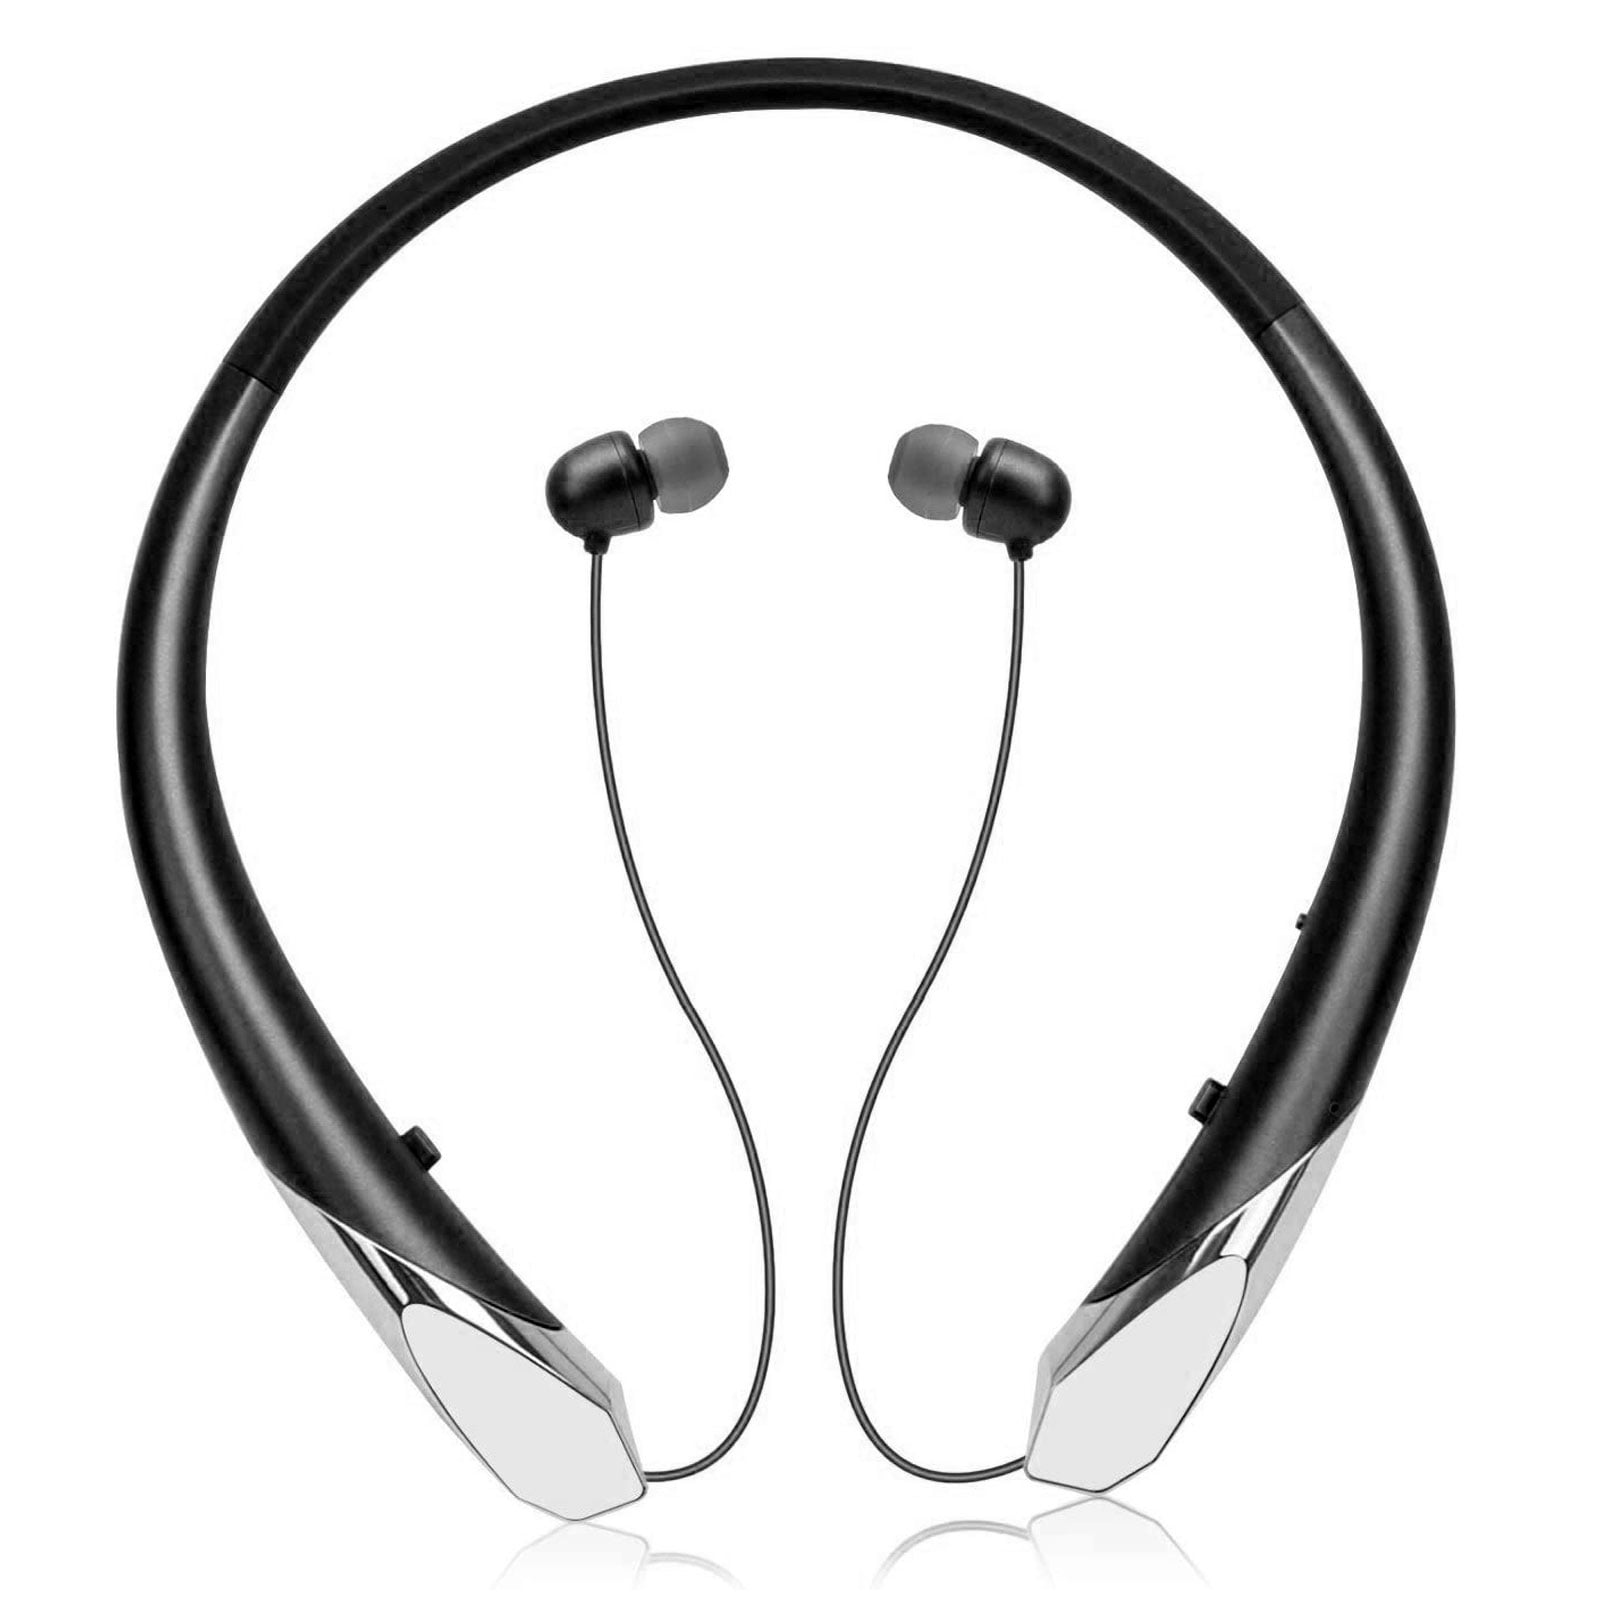 EEEKit Bluetooth Headphones, Wireless Bluetooth V5.0 Neckband Headset Retractable Earbuds HD Stereo Noise Cancelling Earphones with Mic, Call Vibrate Alert,15 Hrs Playtime